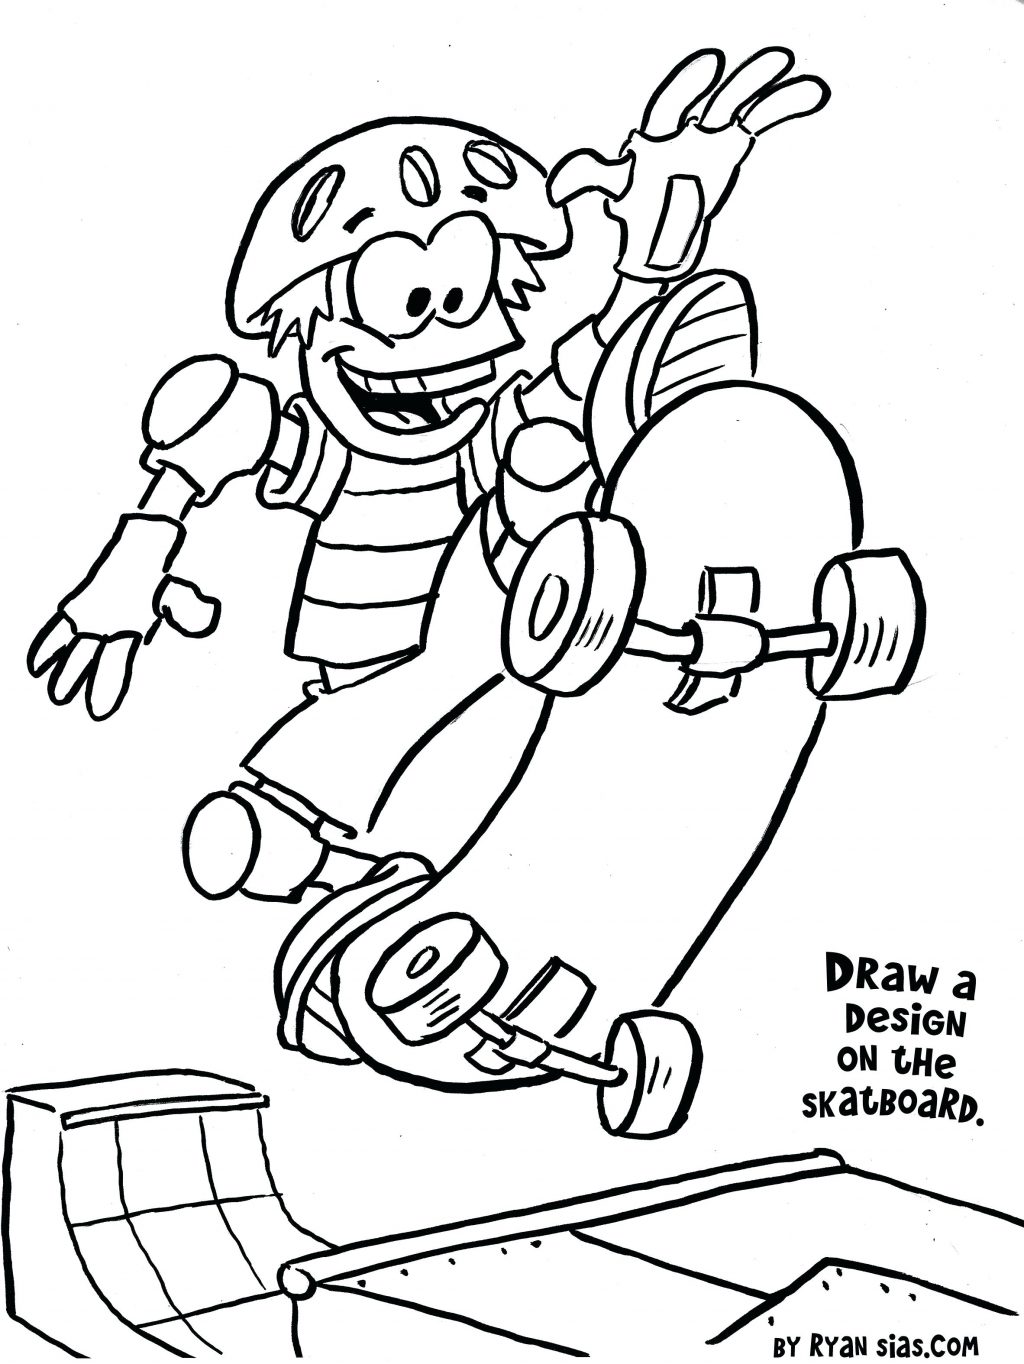 Sports Equipment Coloring Pages at GetColorings.com | Free ...